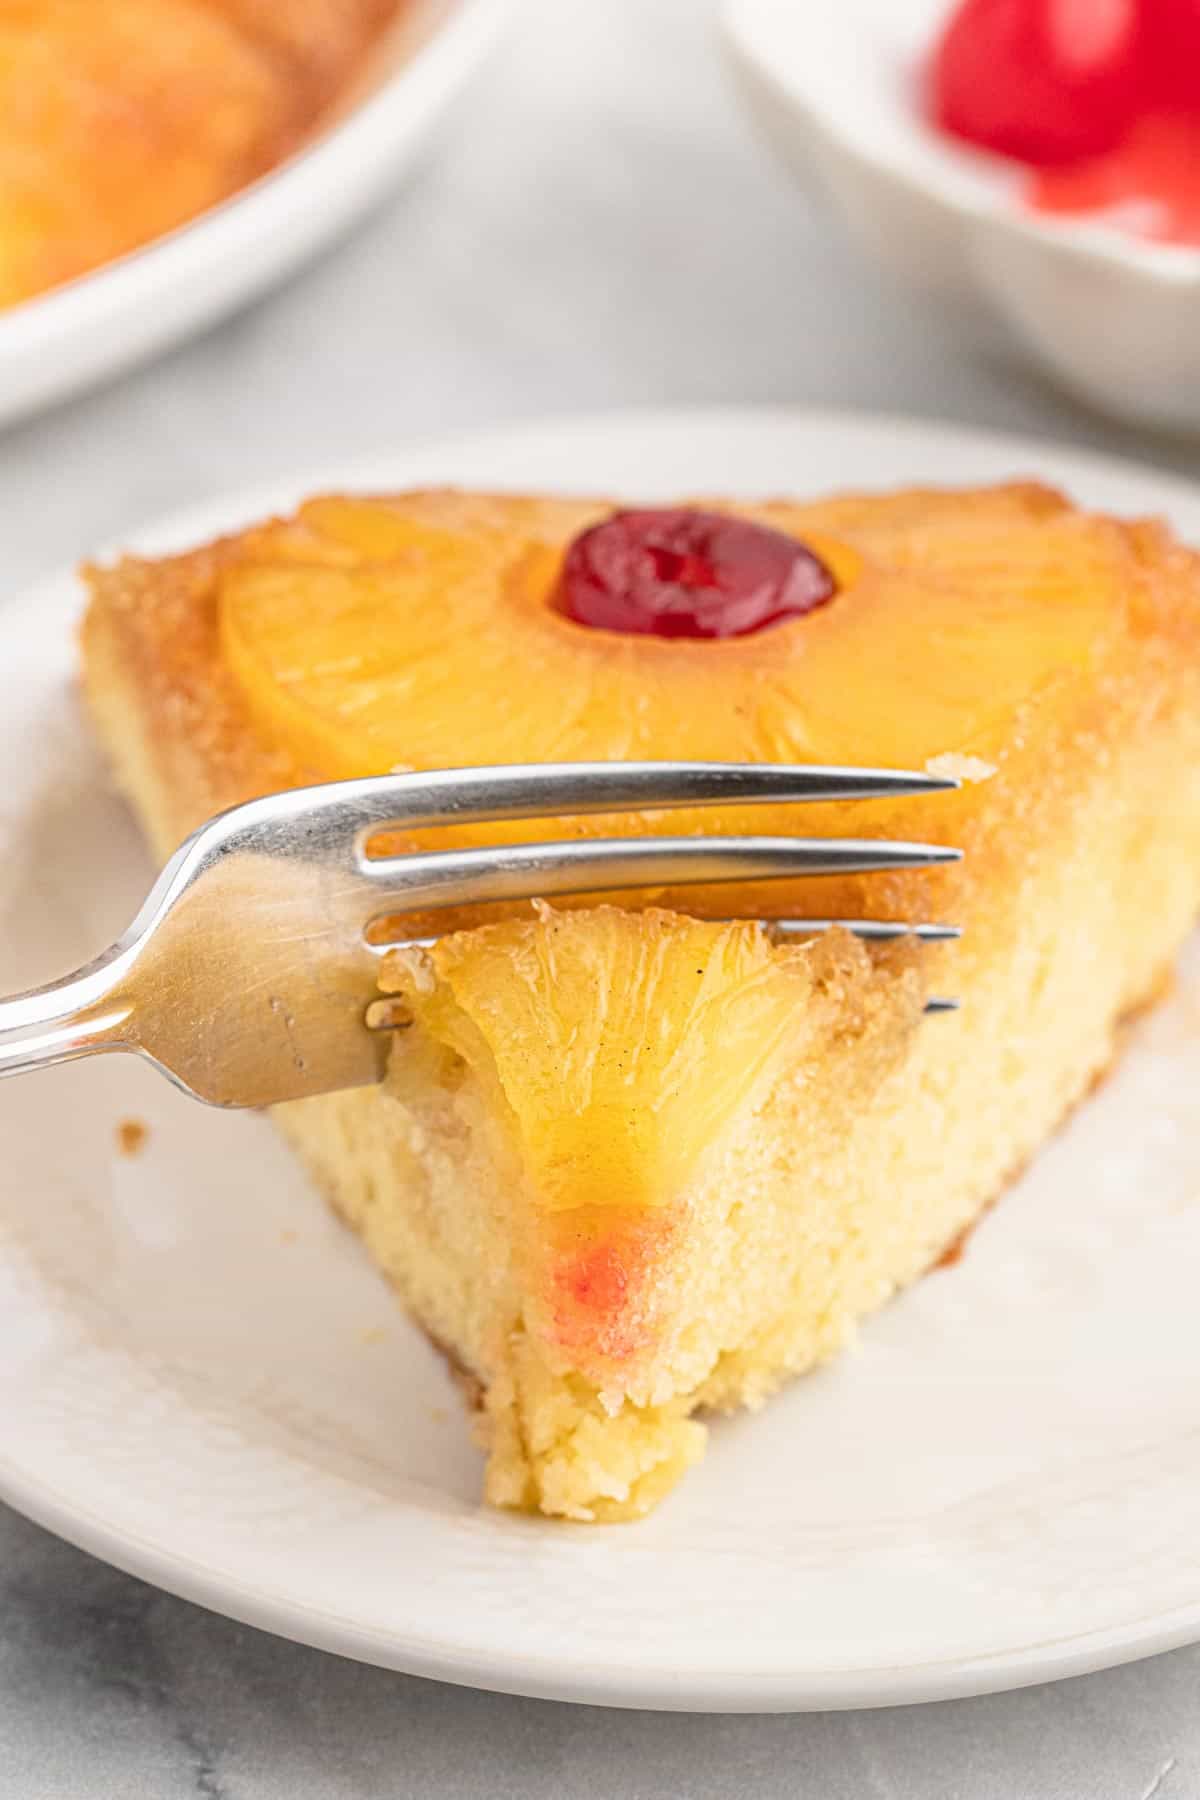 Slice of pineapple cake on a plate with a fork cutting a bite.